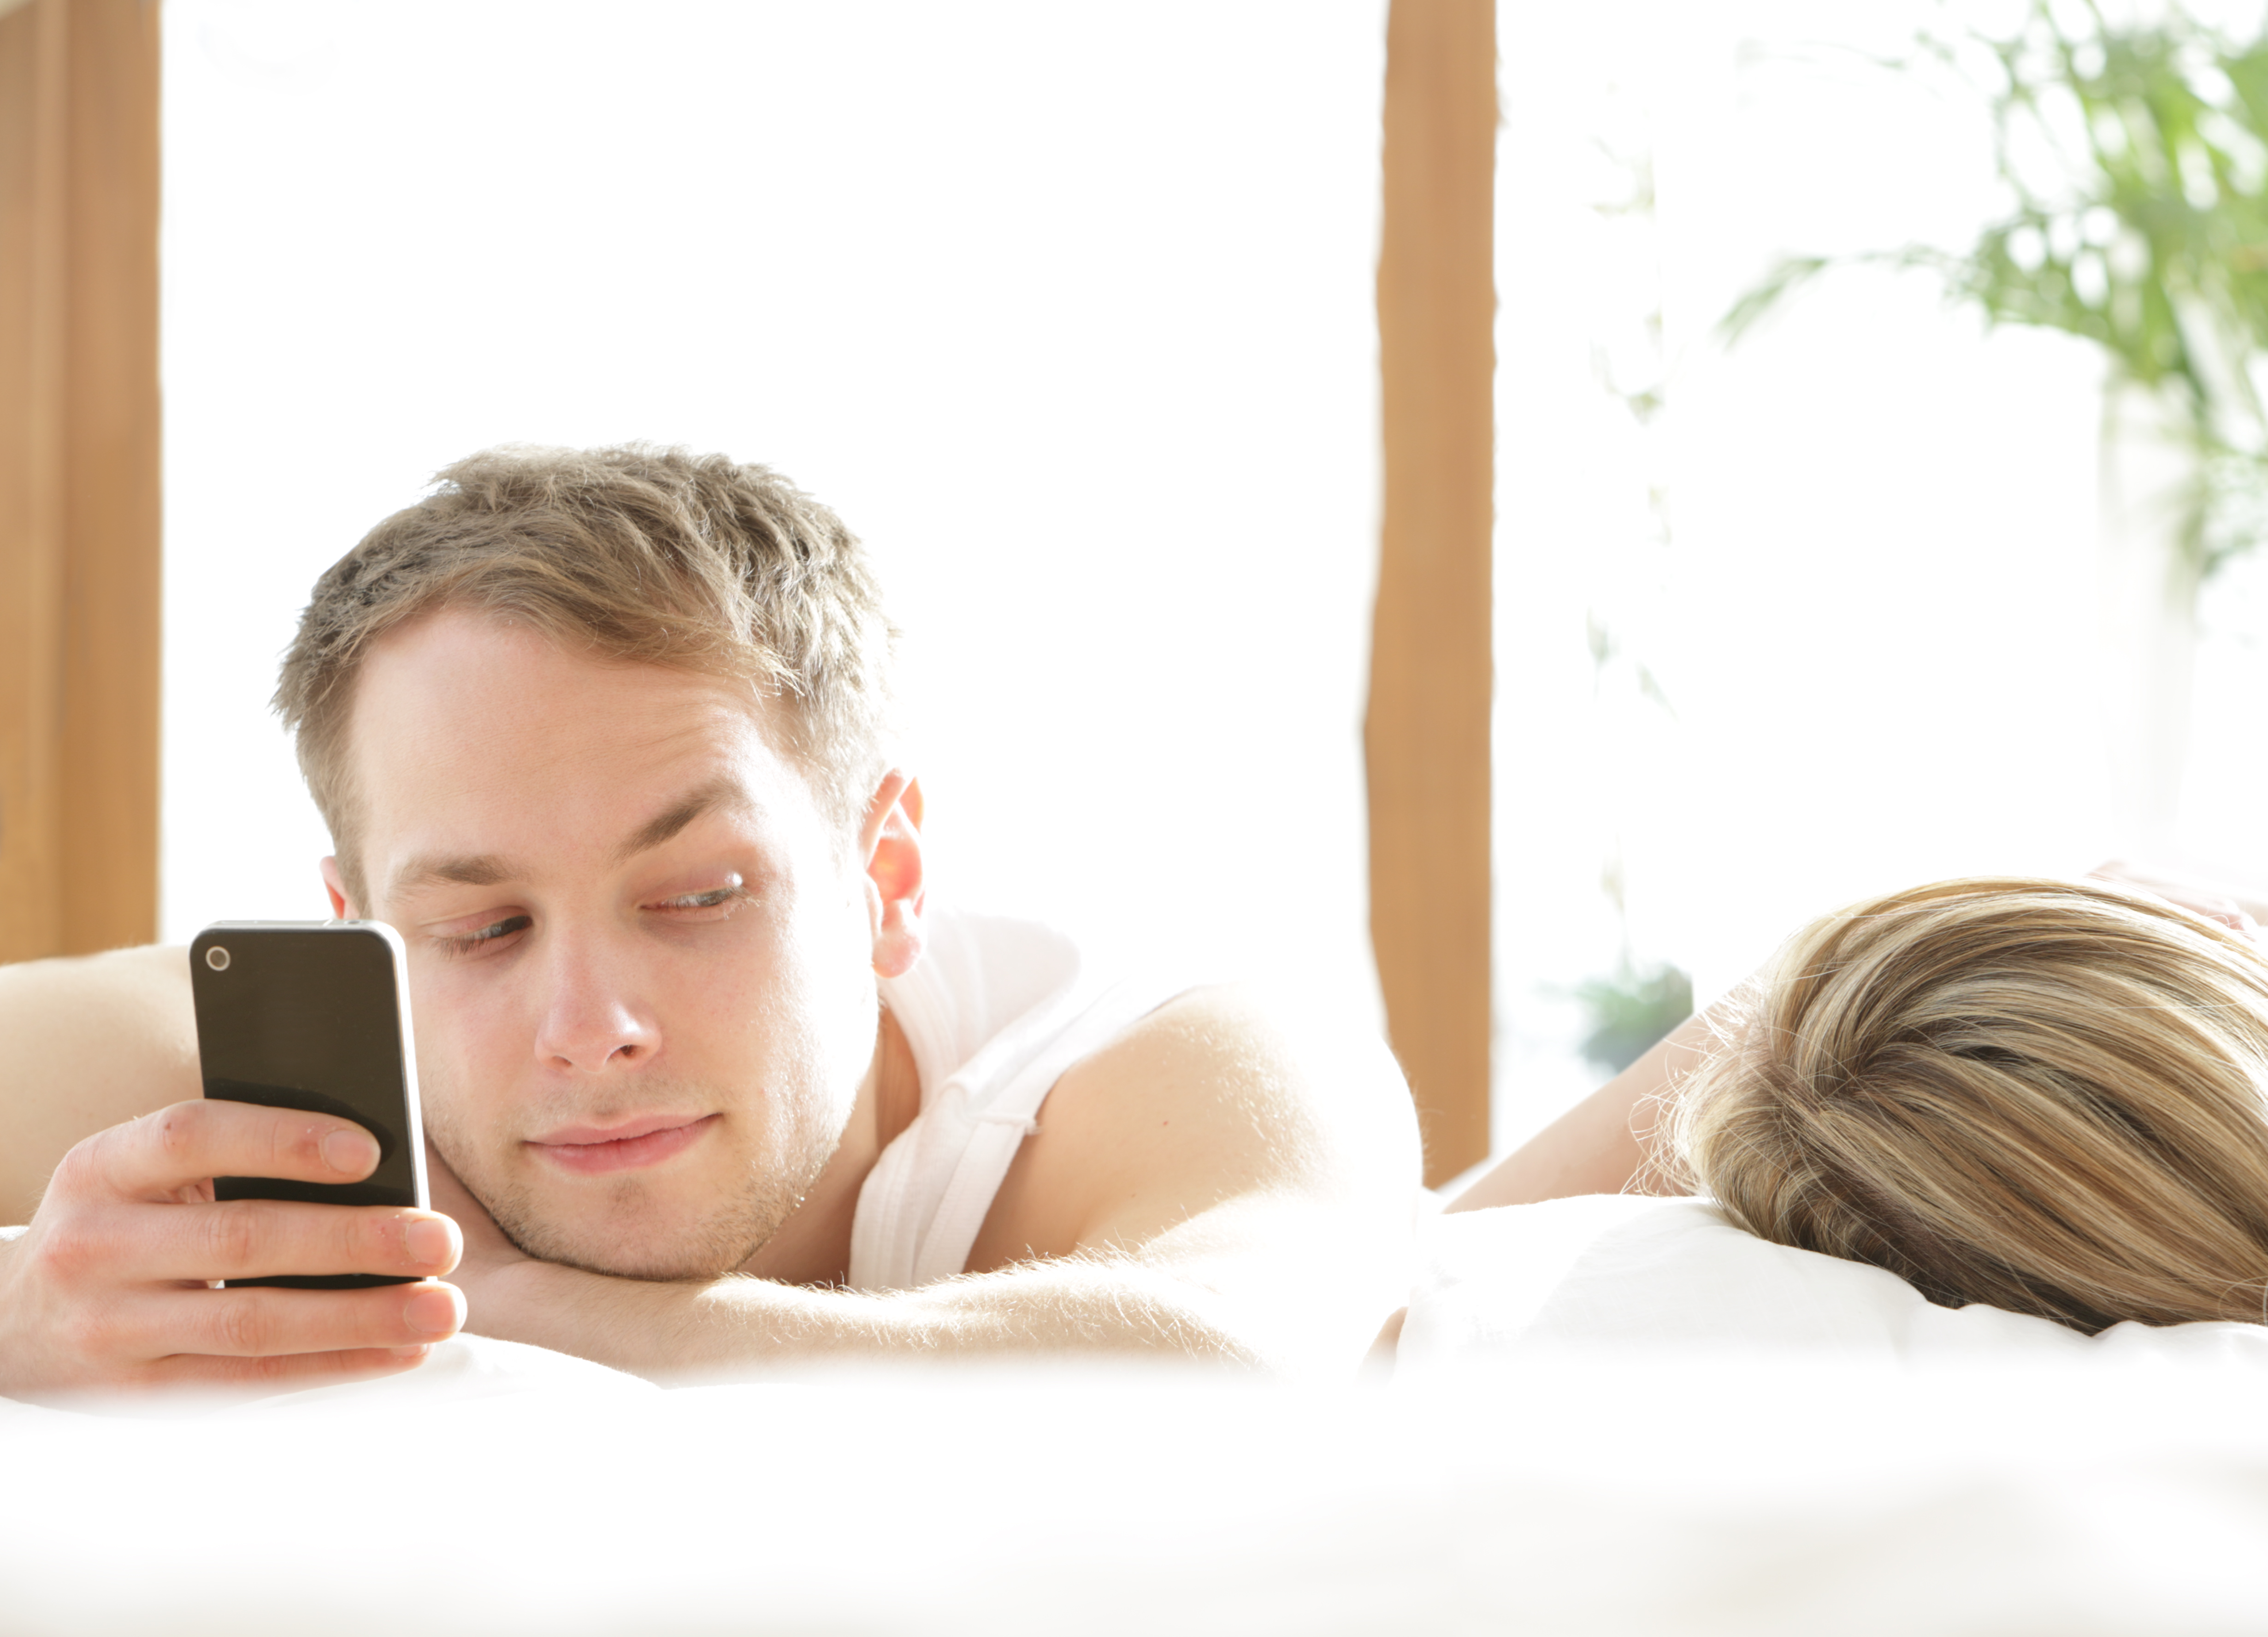 Man with phone in bed, looking at woman asleep | Source: Getty Images